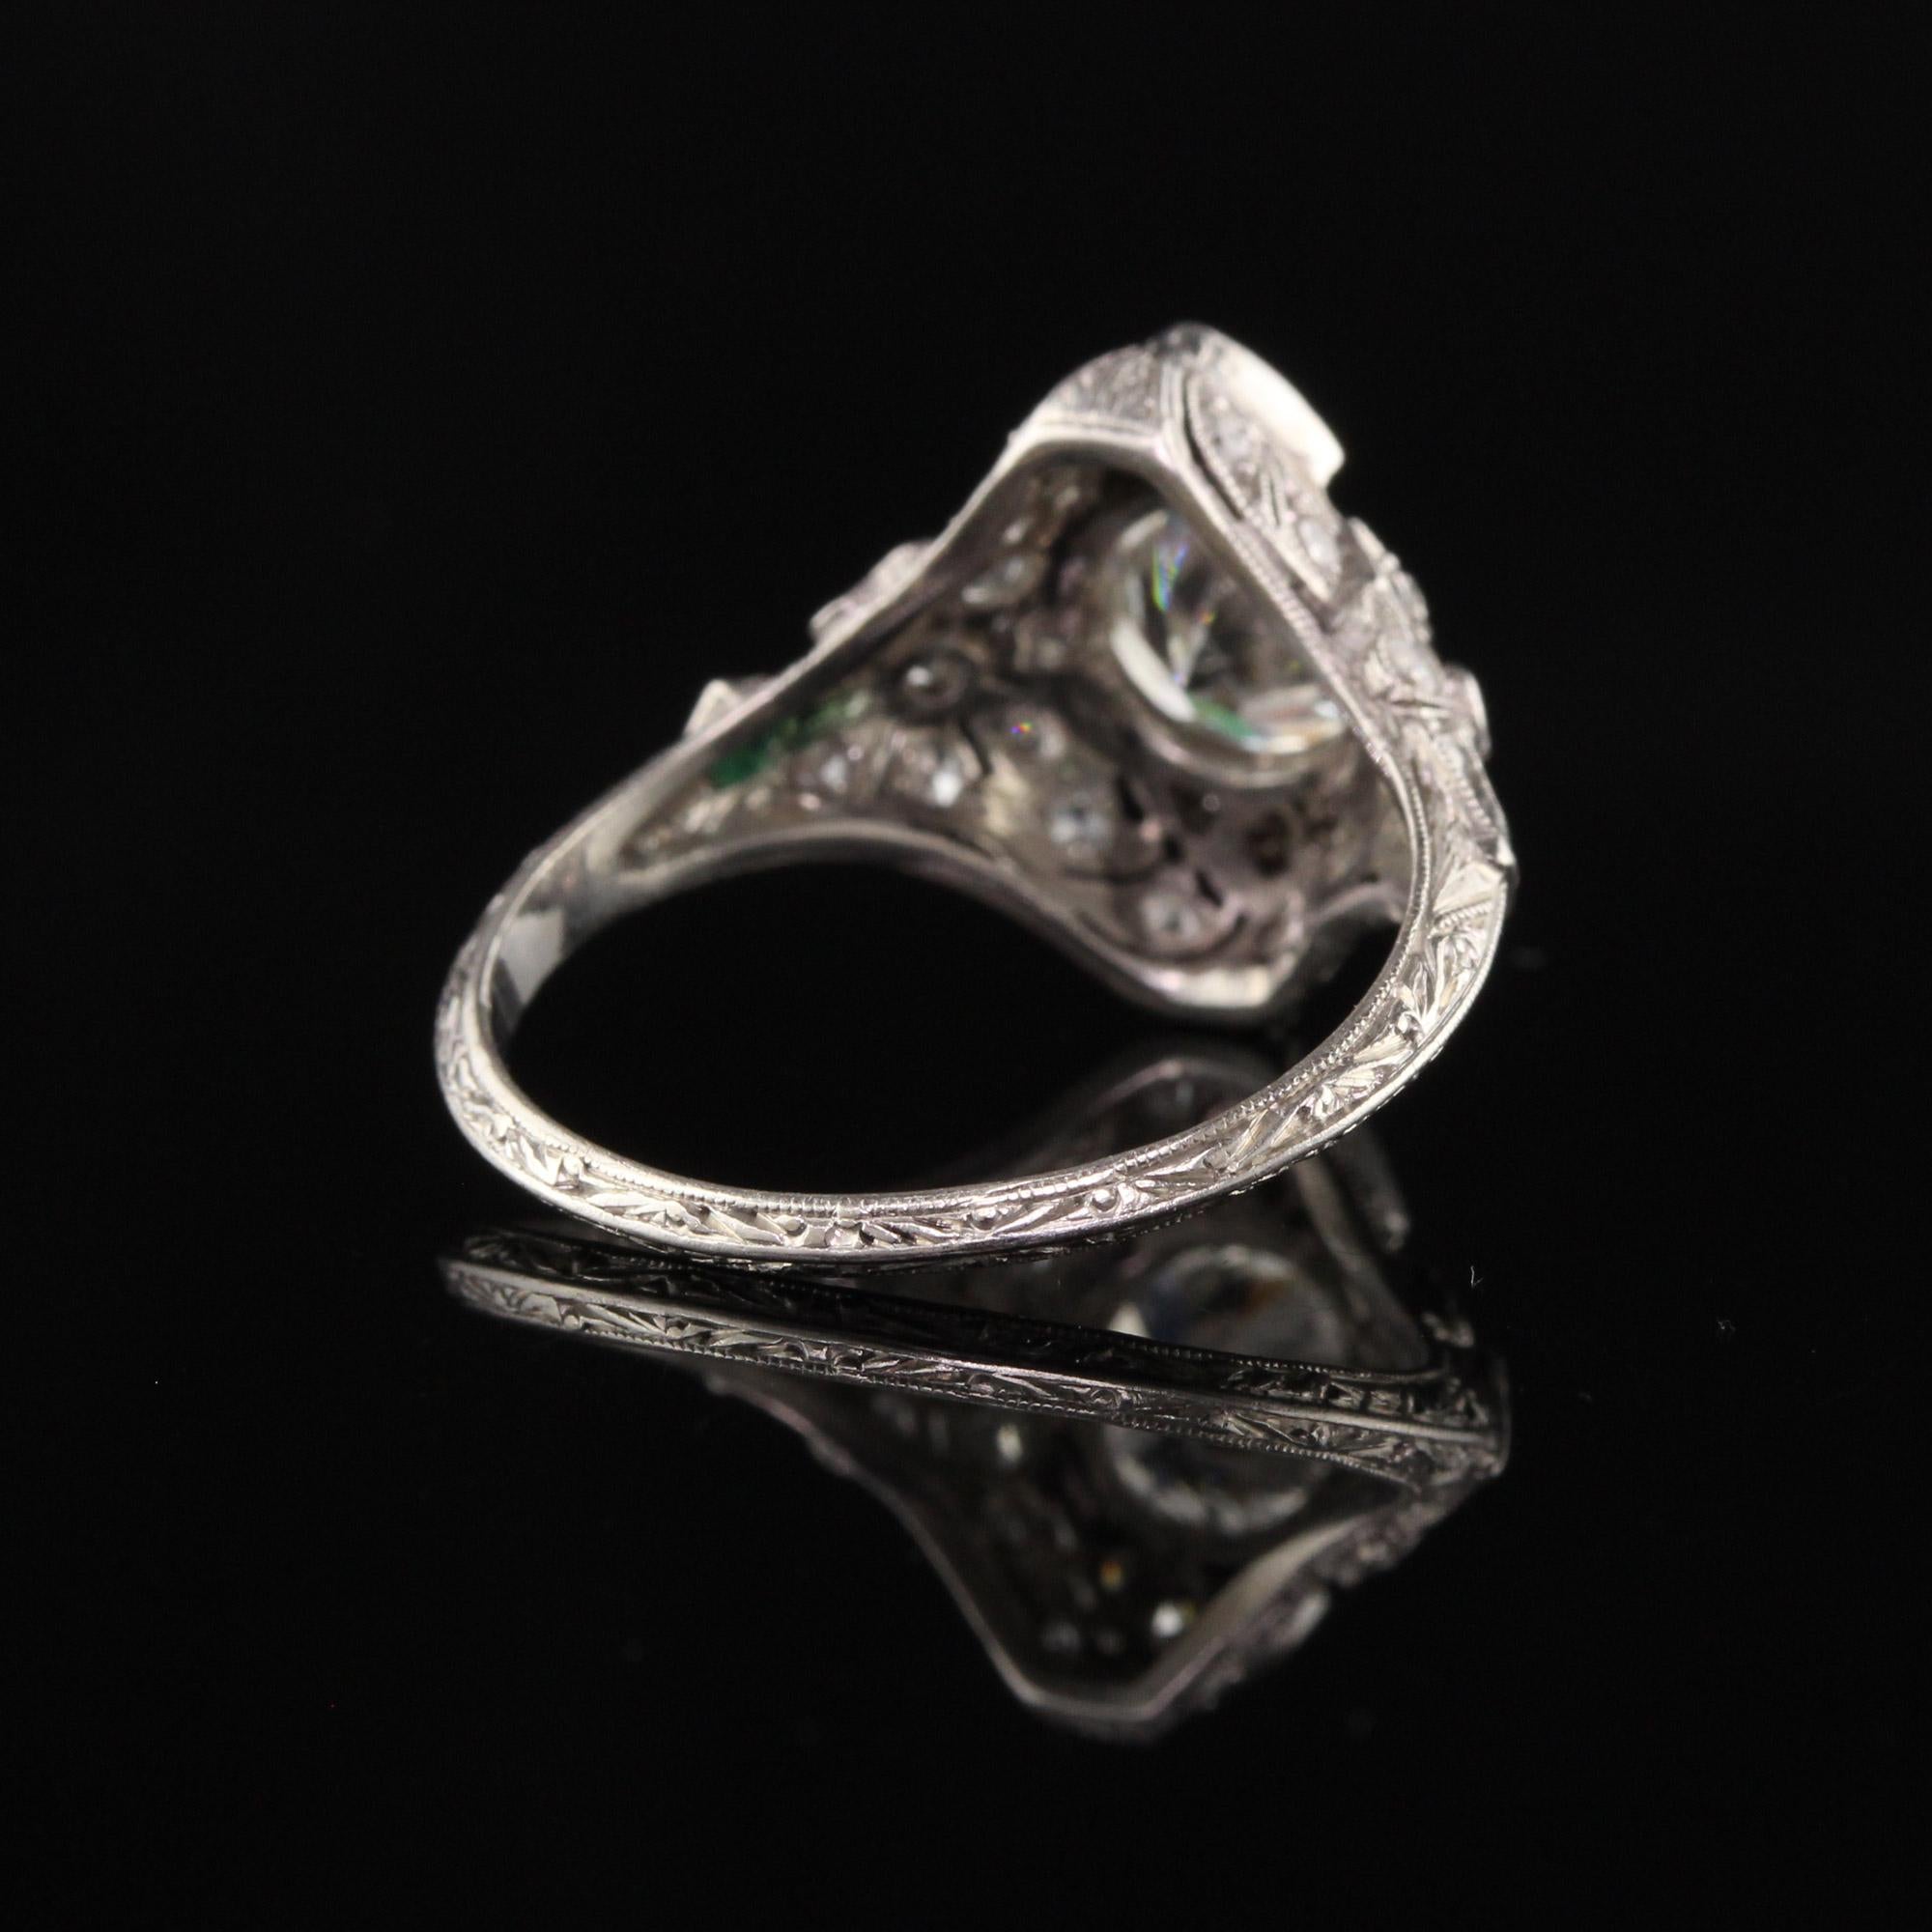 Antique Edwardian Platinum Old European Cut Diamond Flower Motif Engagement Ring In Good Condition For Sale In Great Neck, NY